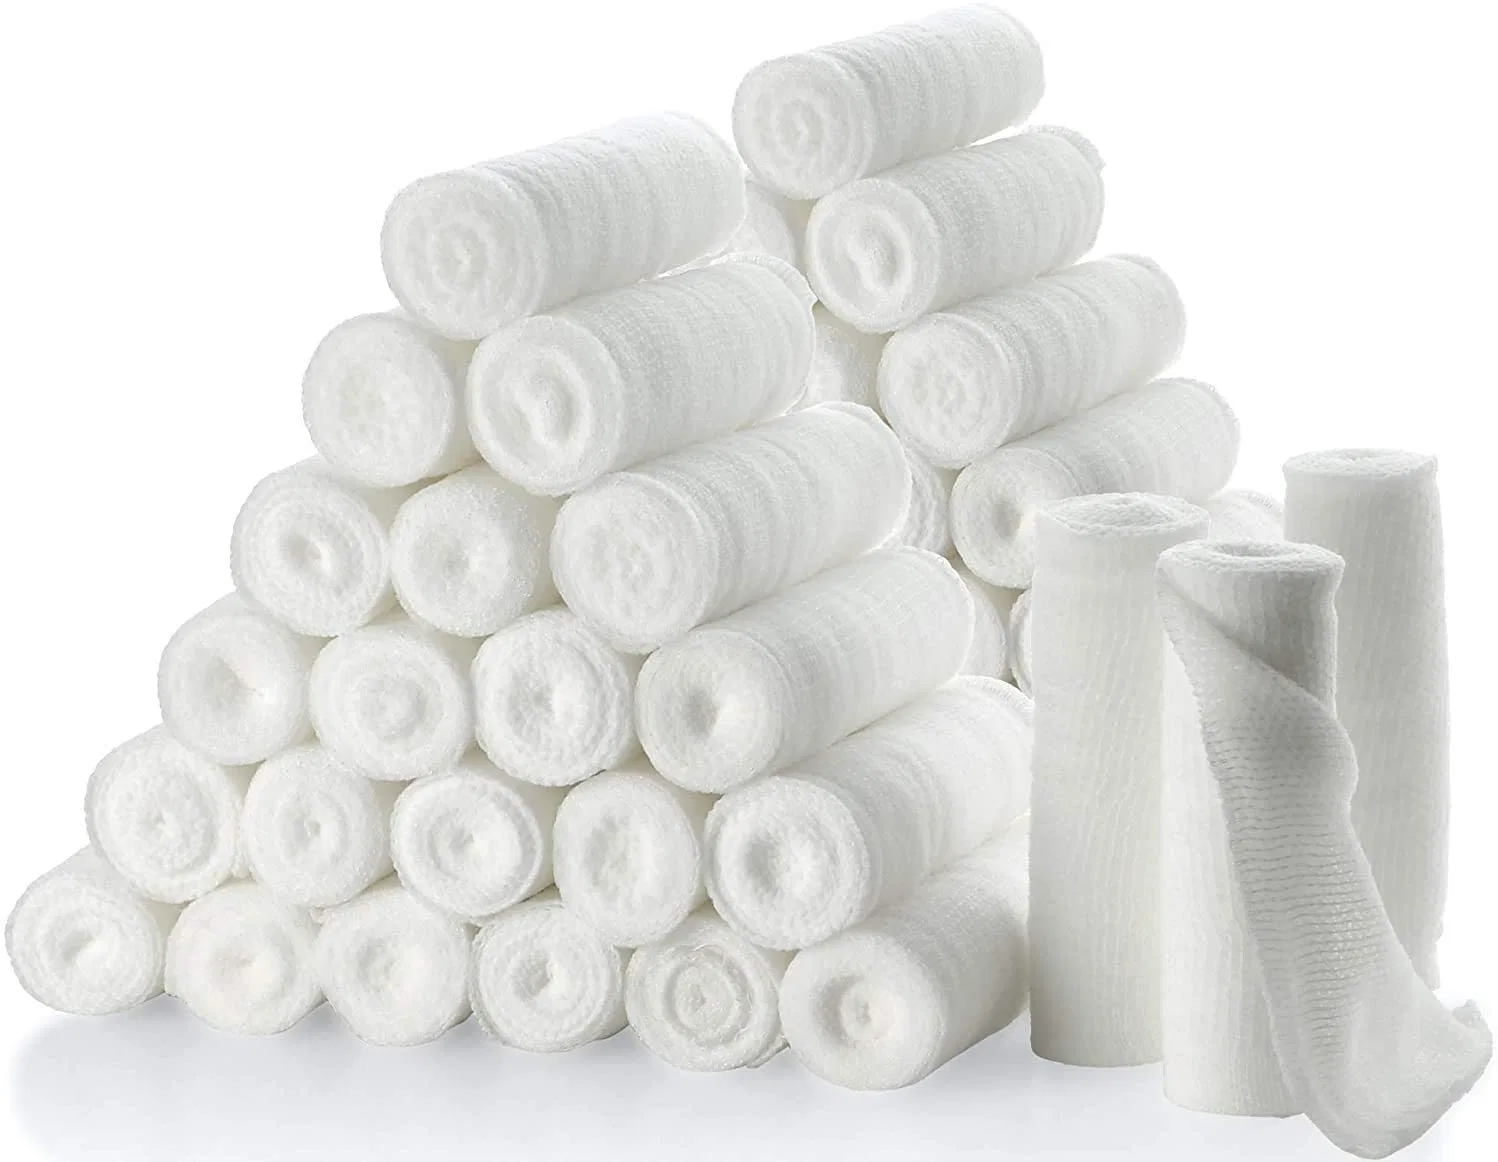 Medical Stretch Cotton Gauze Bandage for Wound Care